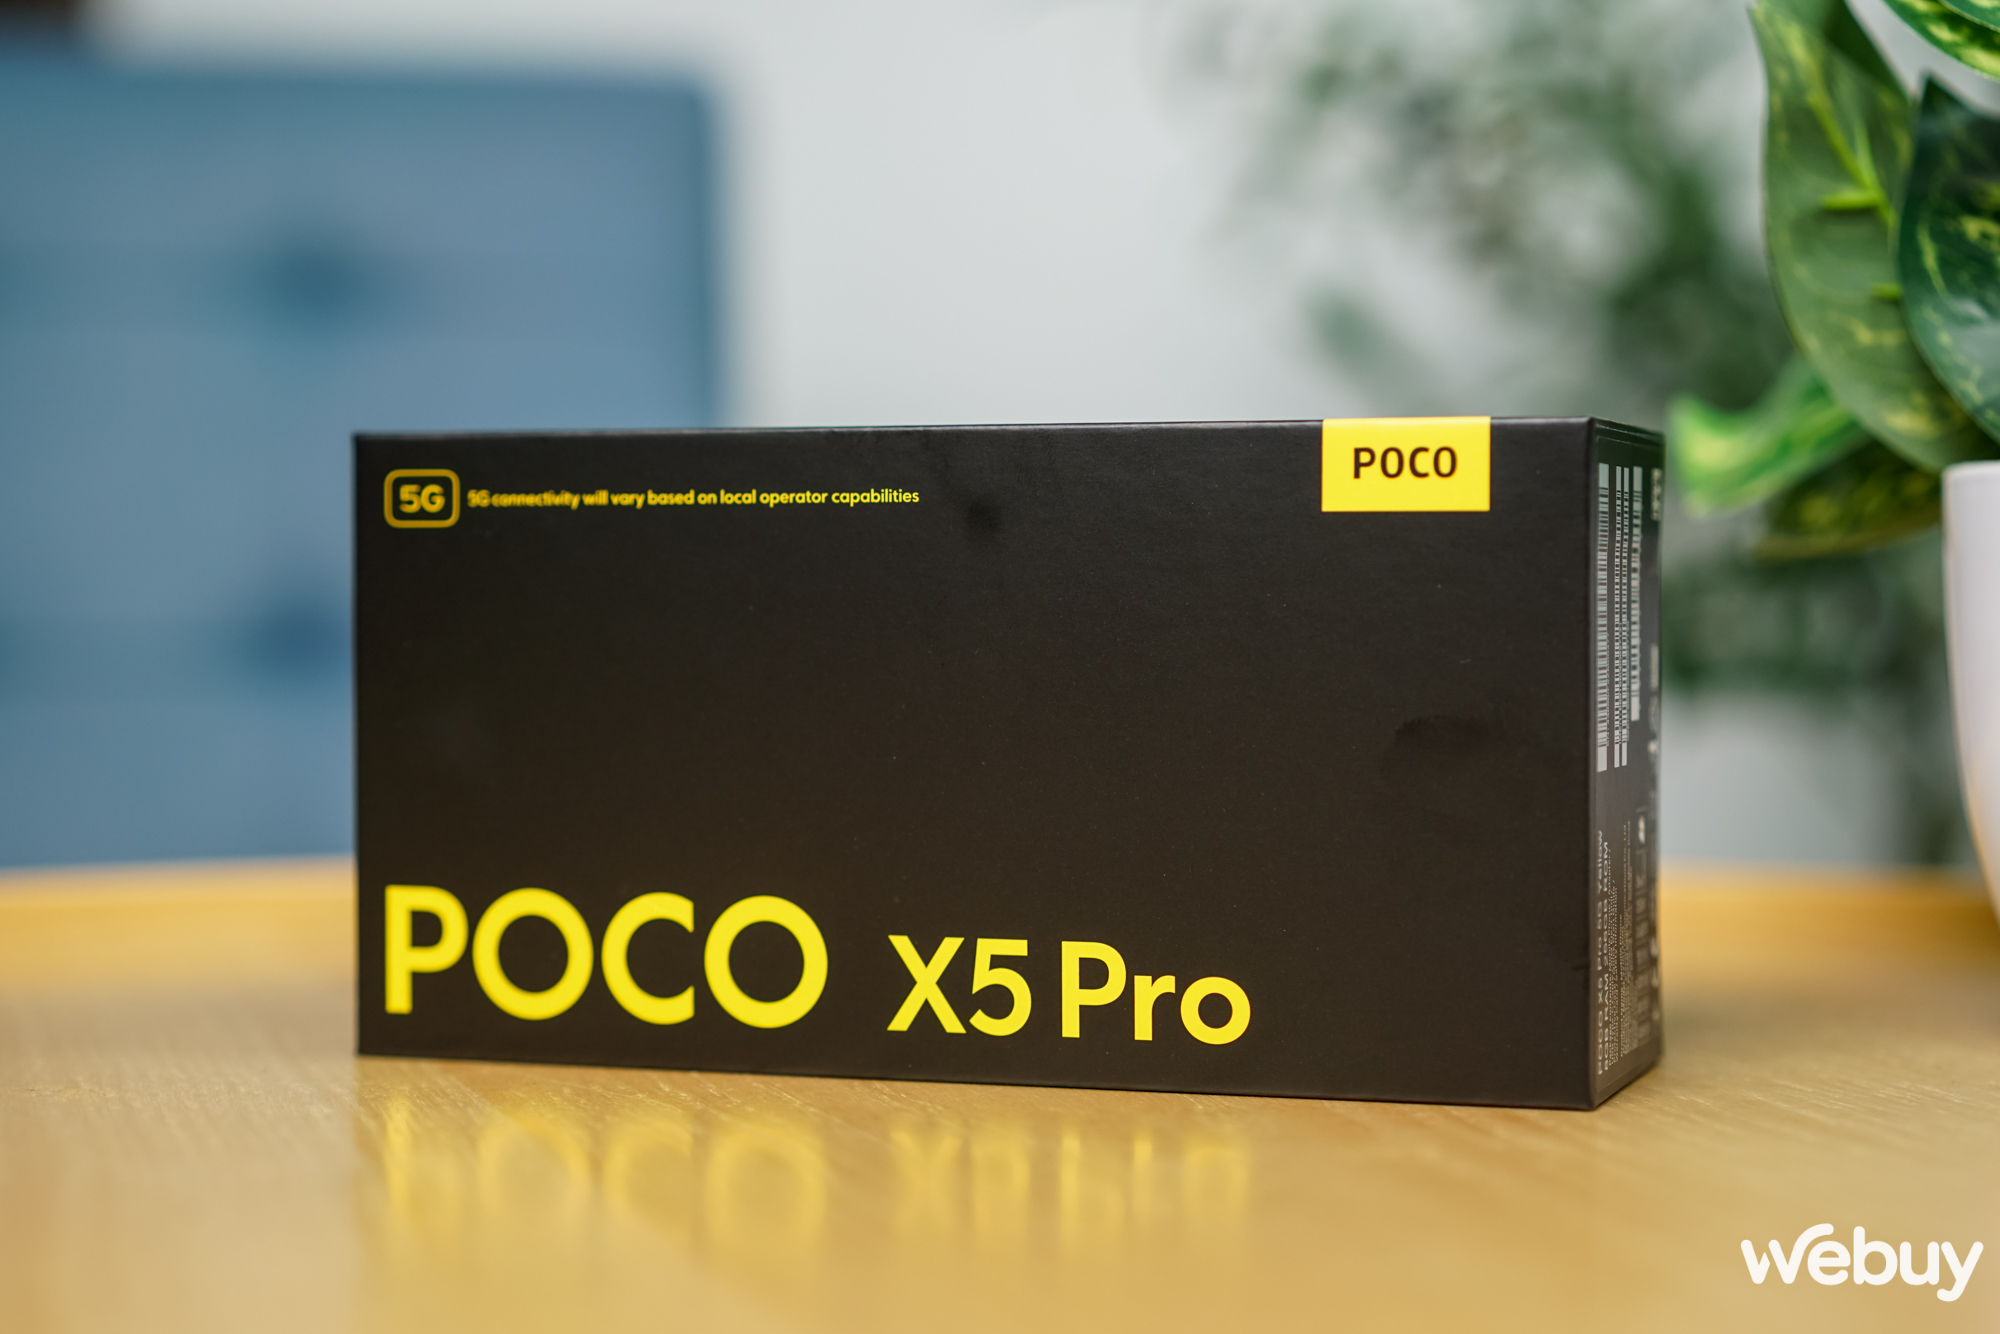 POCO X5 Pro Unboxed in Vietnam: Luxurious Black Gold Color, 120Hz Display, 108MP Camera - Photo 1.